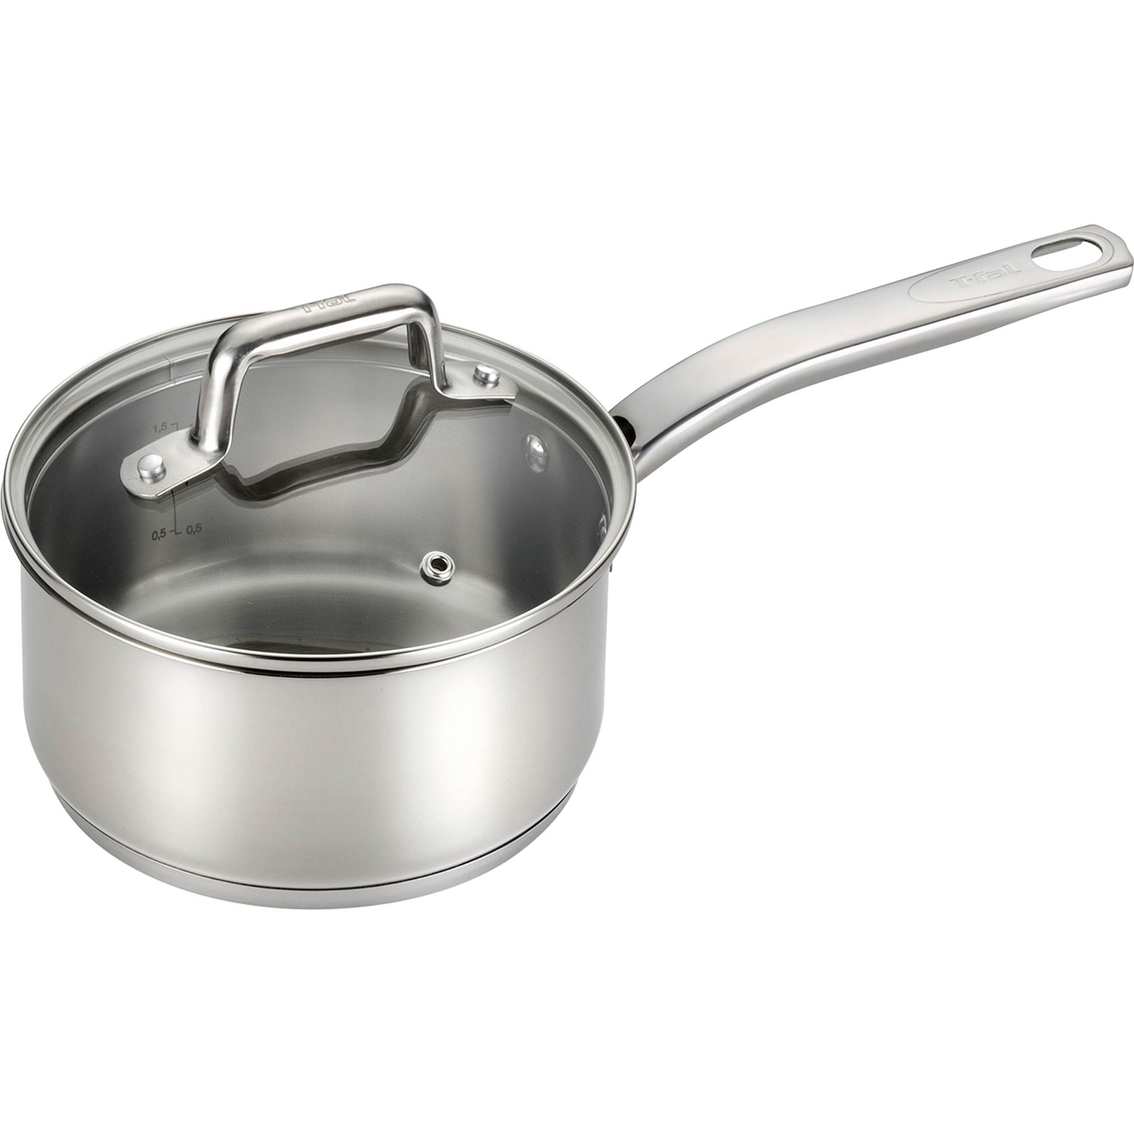 T-fal Precision Stainless Steel 3 Qt. Sauce Pan | Atg Archive | Shop T Fal Stainless Steel Saucepan